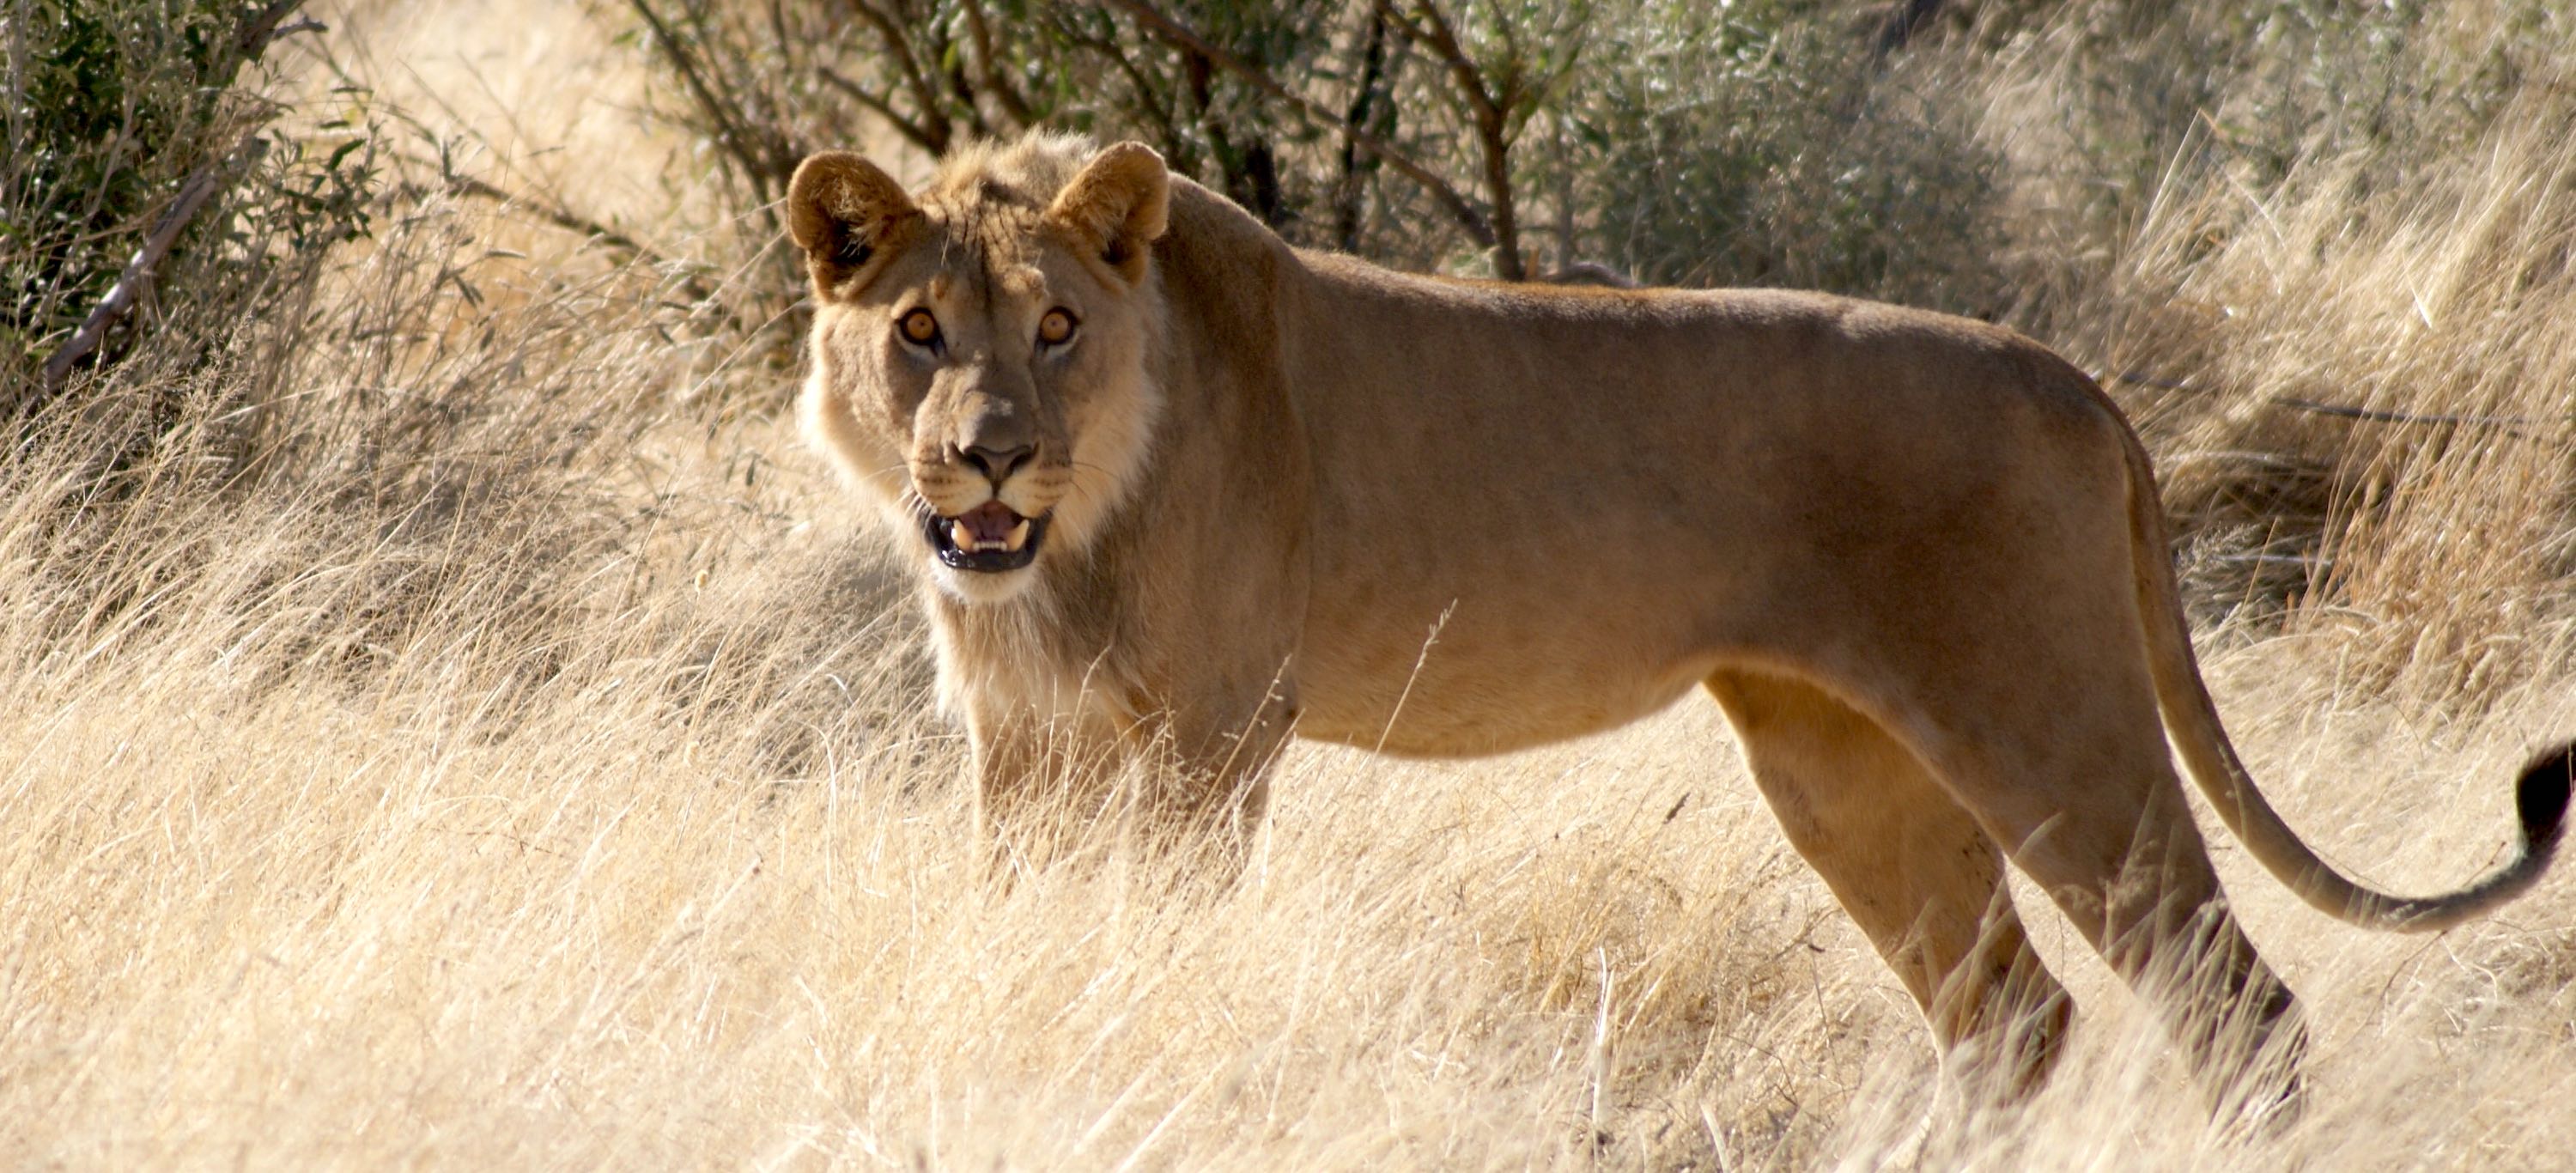 A male lion looks towards the camera.